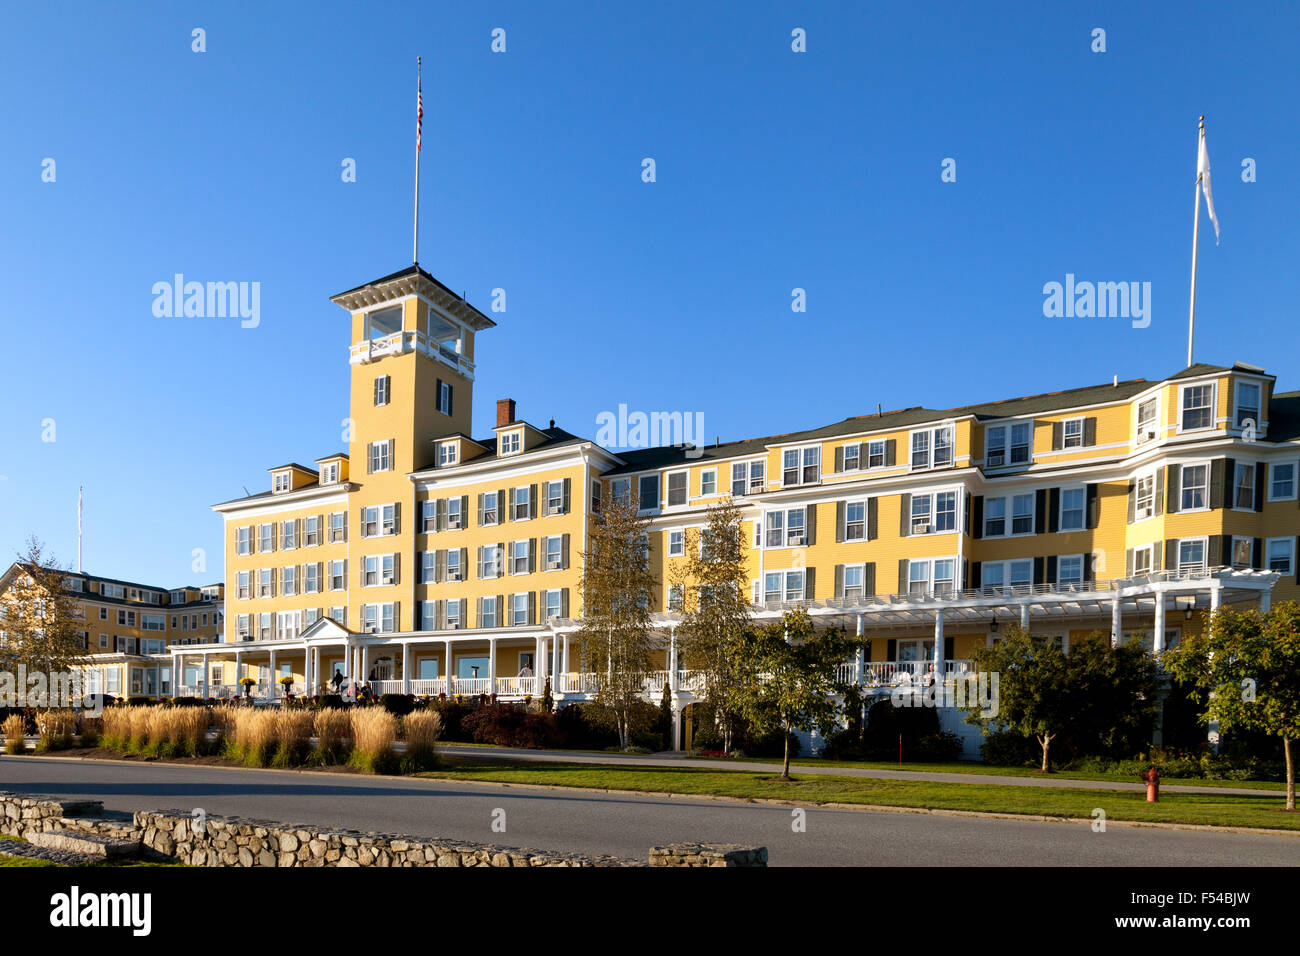 The luxury Mount View Grand Hotel, Whitefield, New Hampshire USA Stock Photo